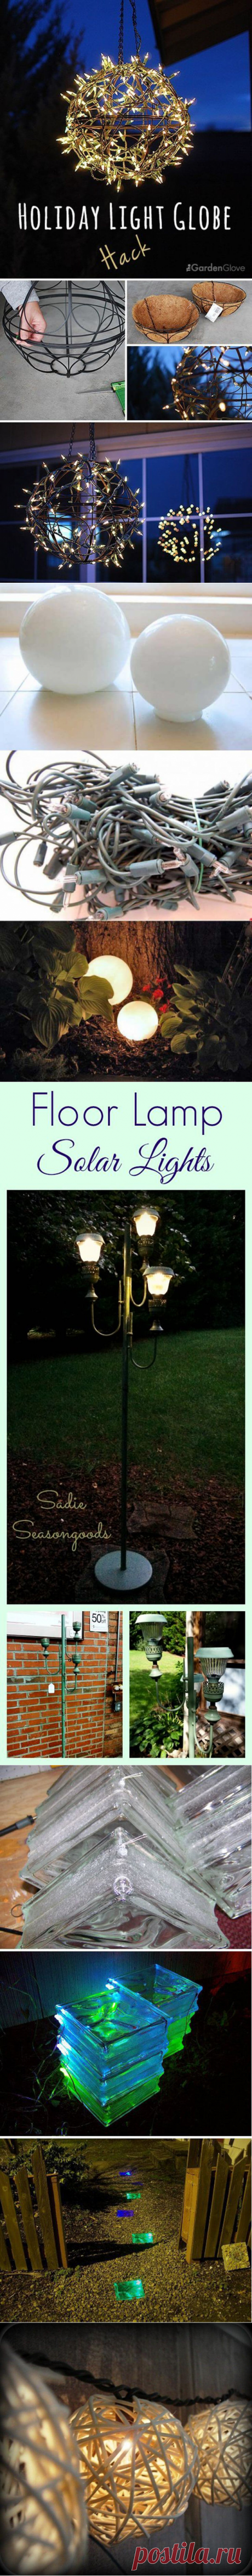 25 Best DIY Outdoor Lighting Ideas and Designs for 2018